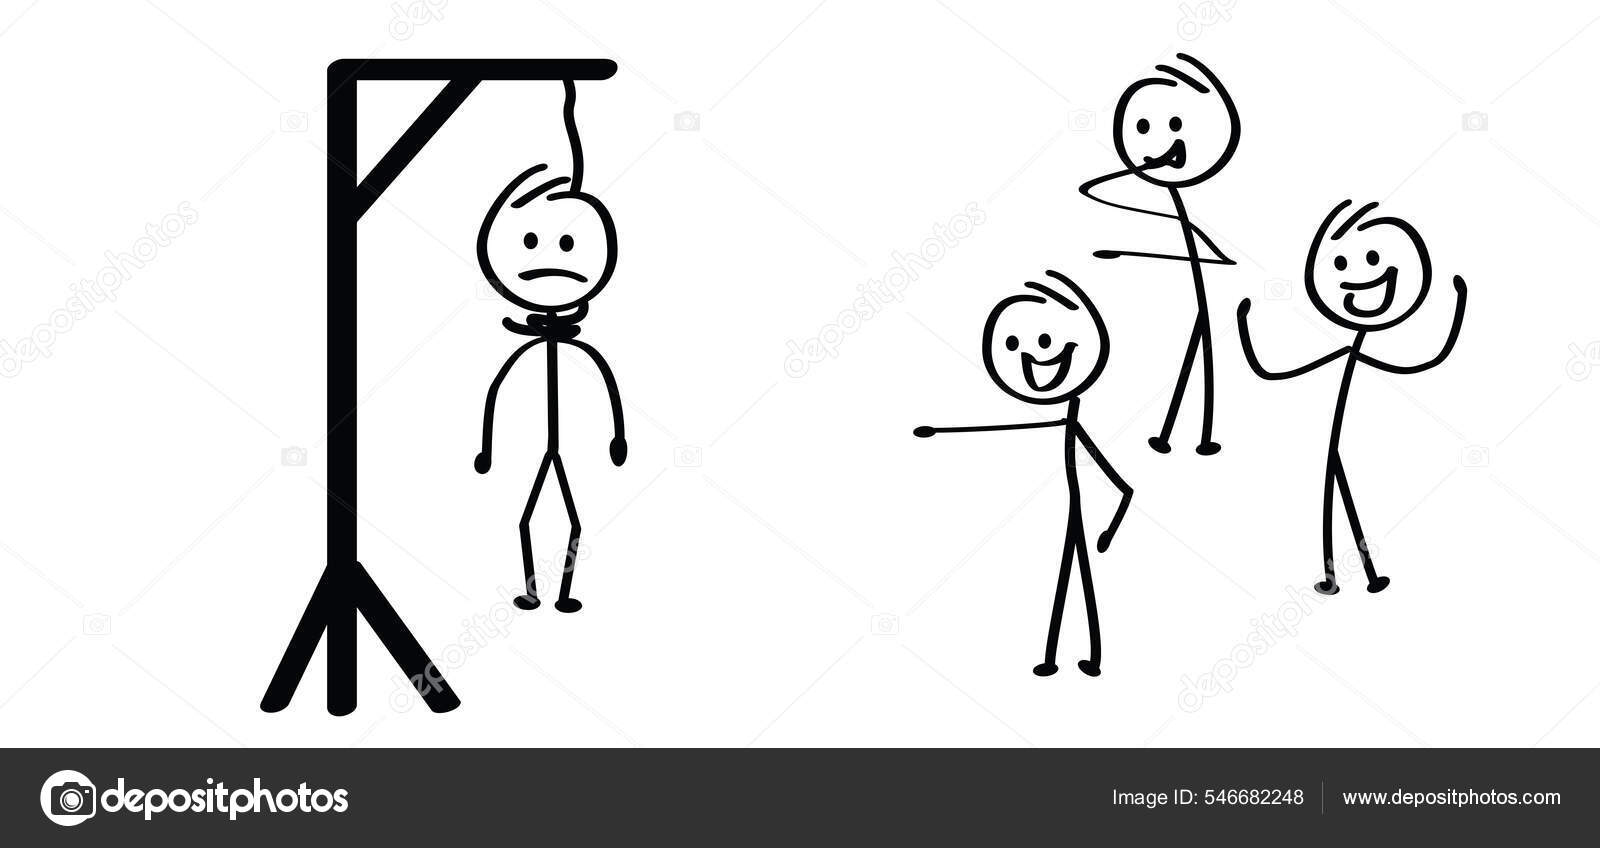 Log in  Funny stick figures, Clean funny pictures, Funny stickman